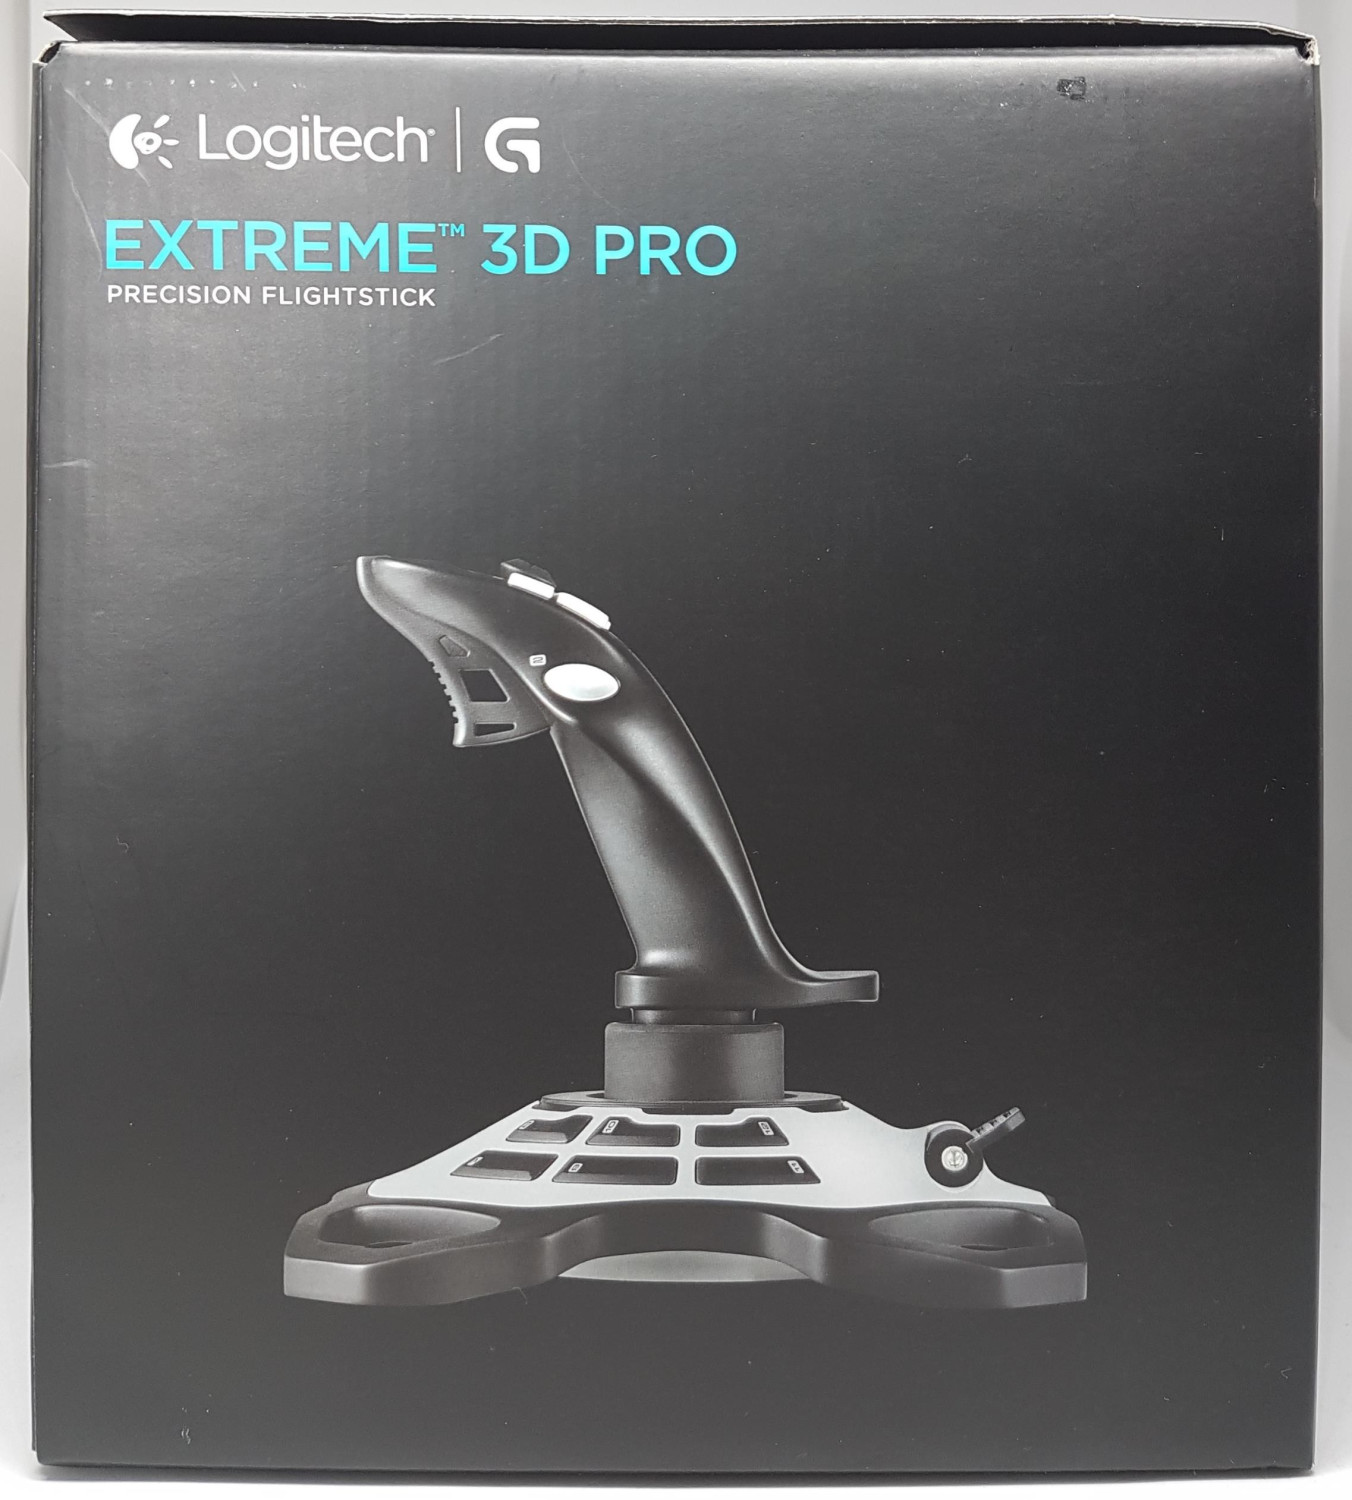 Buy Logitech Extreme 3D Pro from £40.89 (Today) – Best Deals on